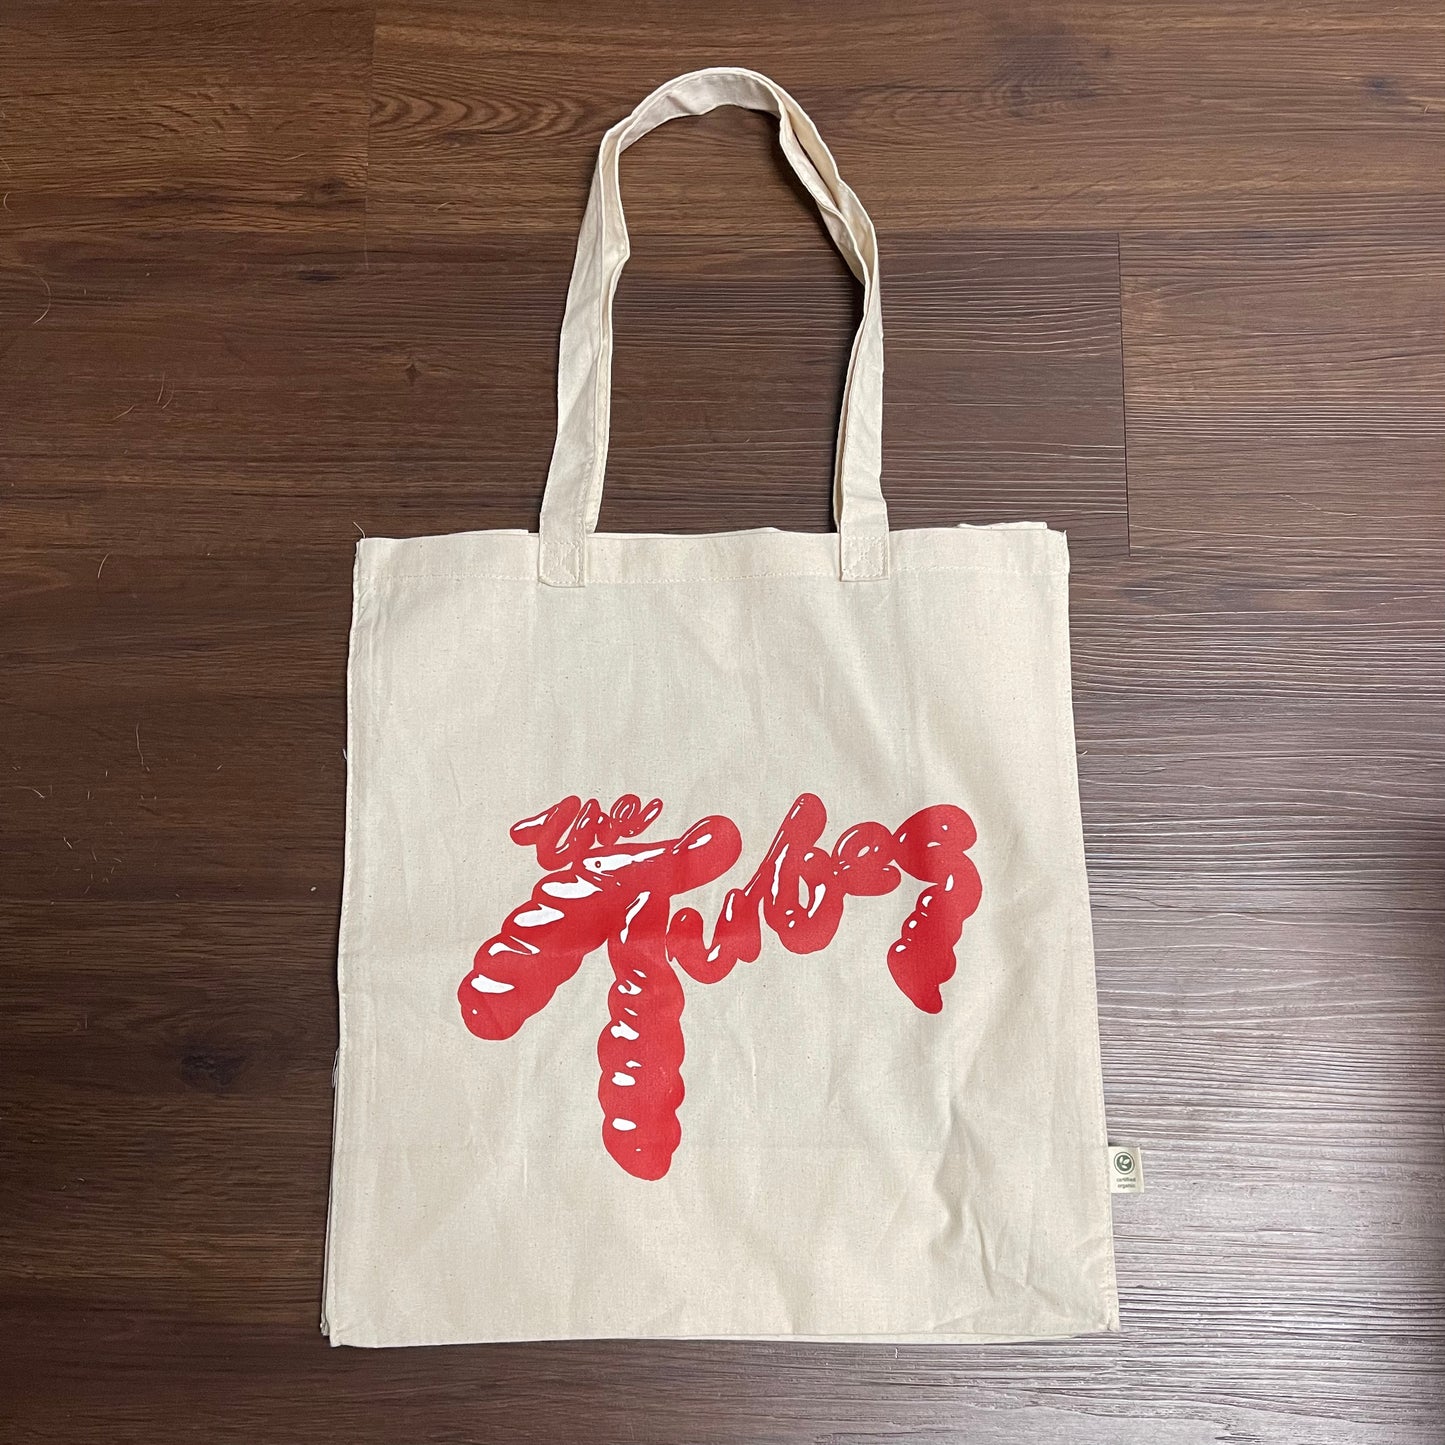 Toothpaste Tote Bag